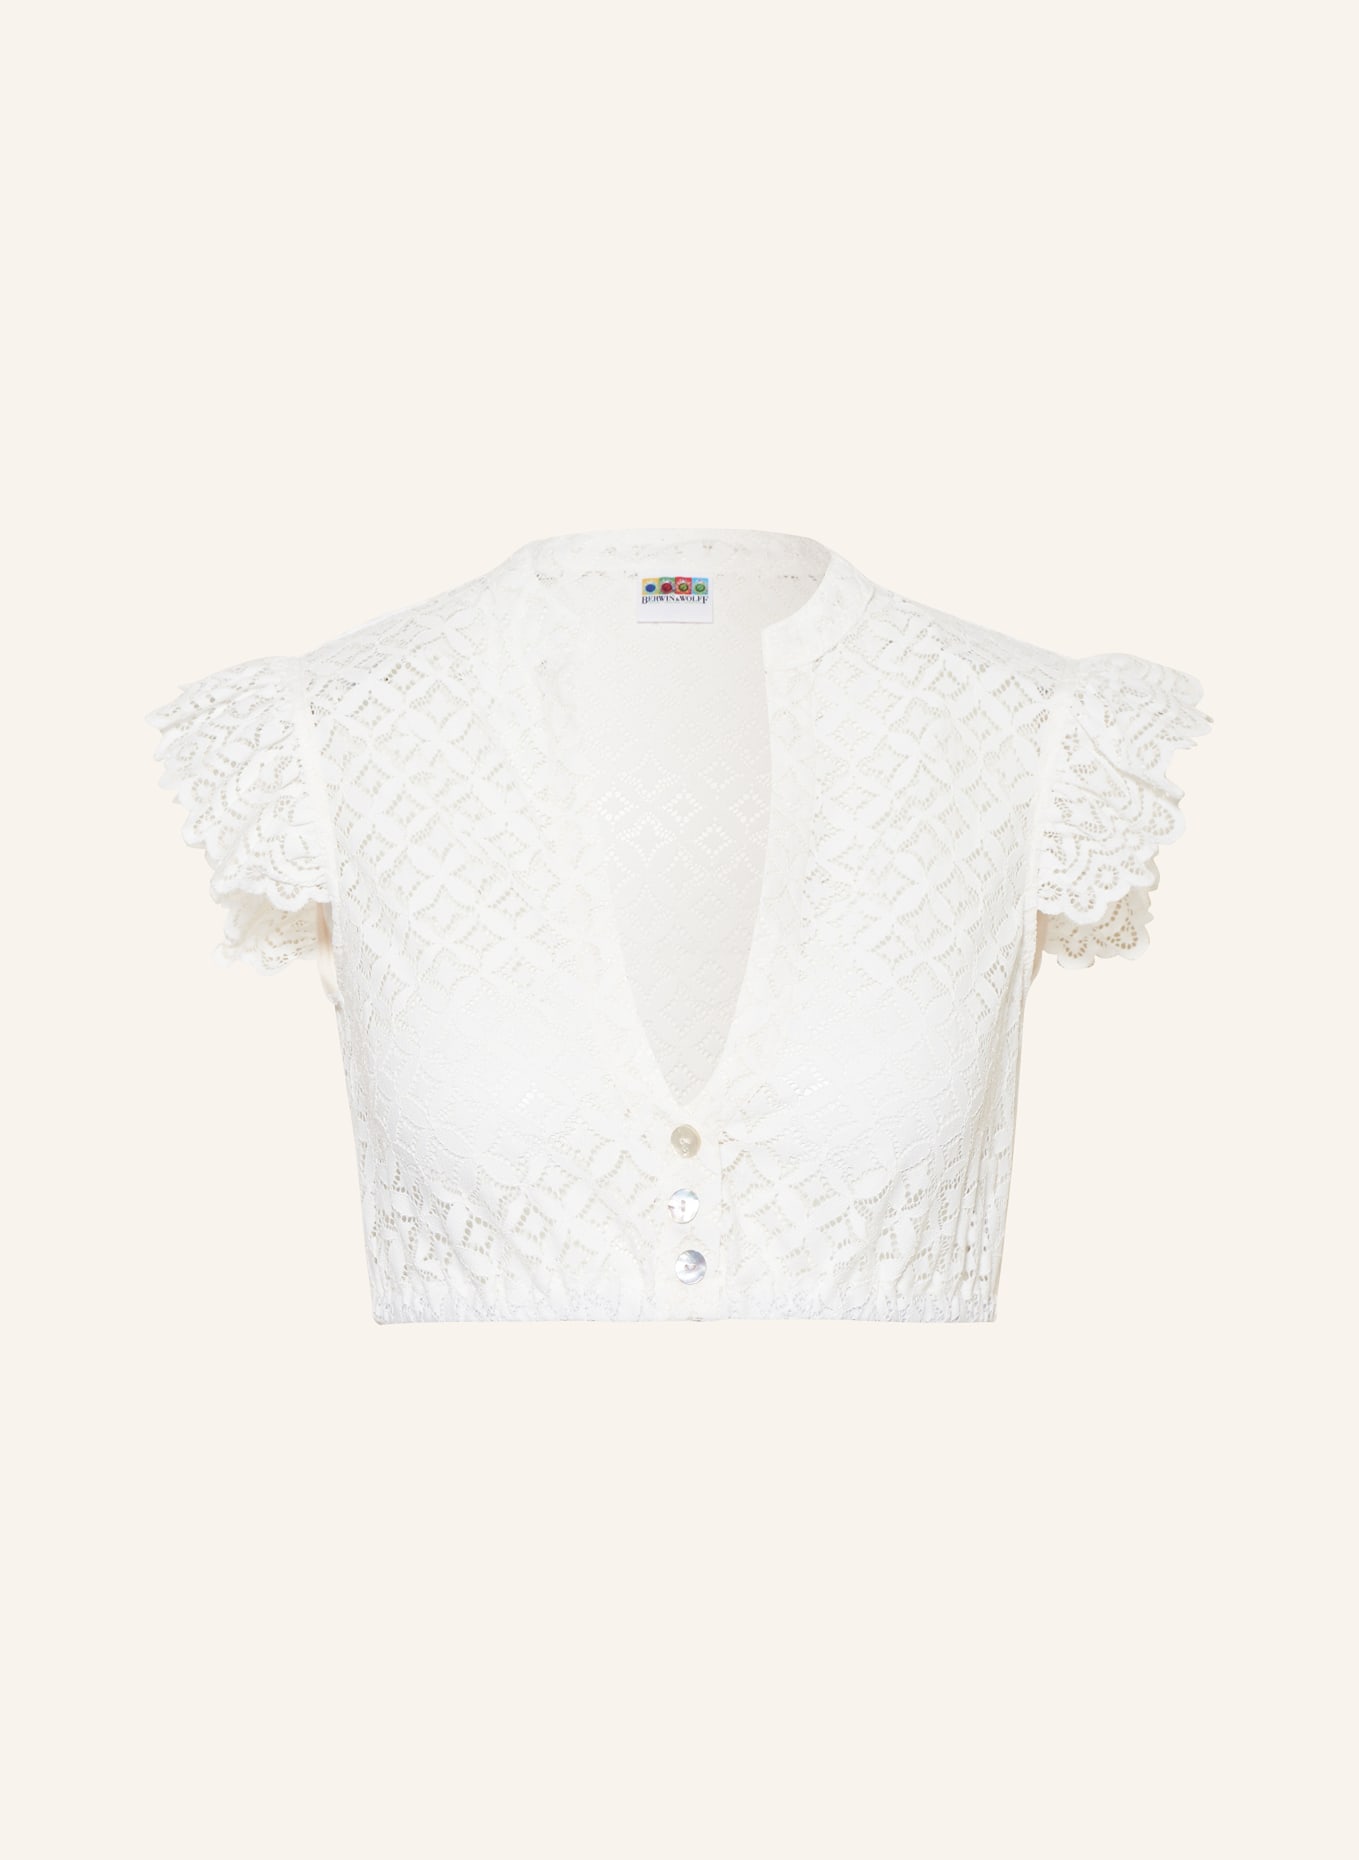 BERWIN & WOLFF Dirndl blouse made of lace, Color: ECRU (Image 1)